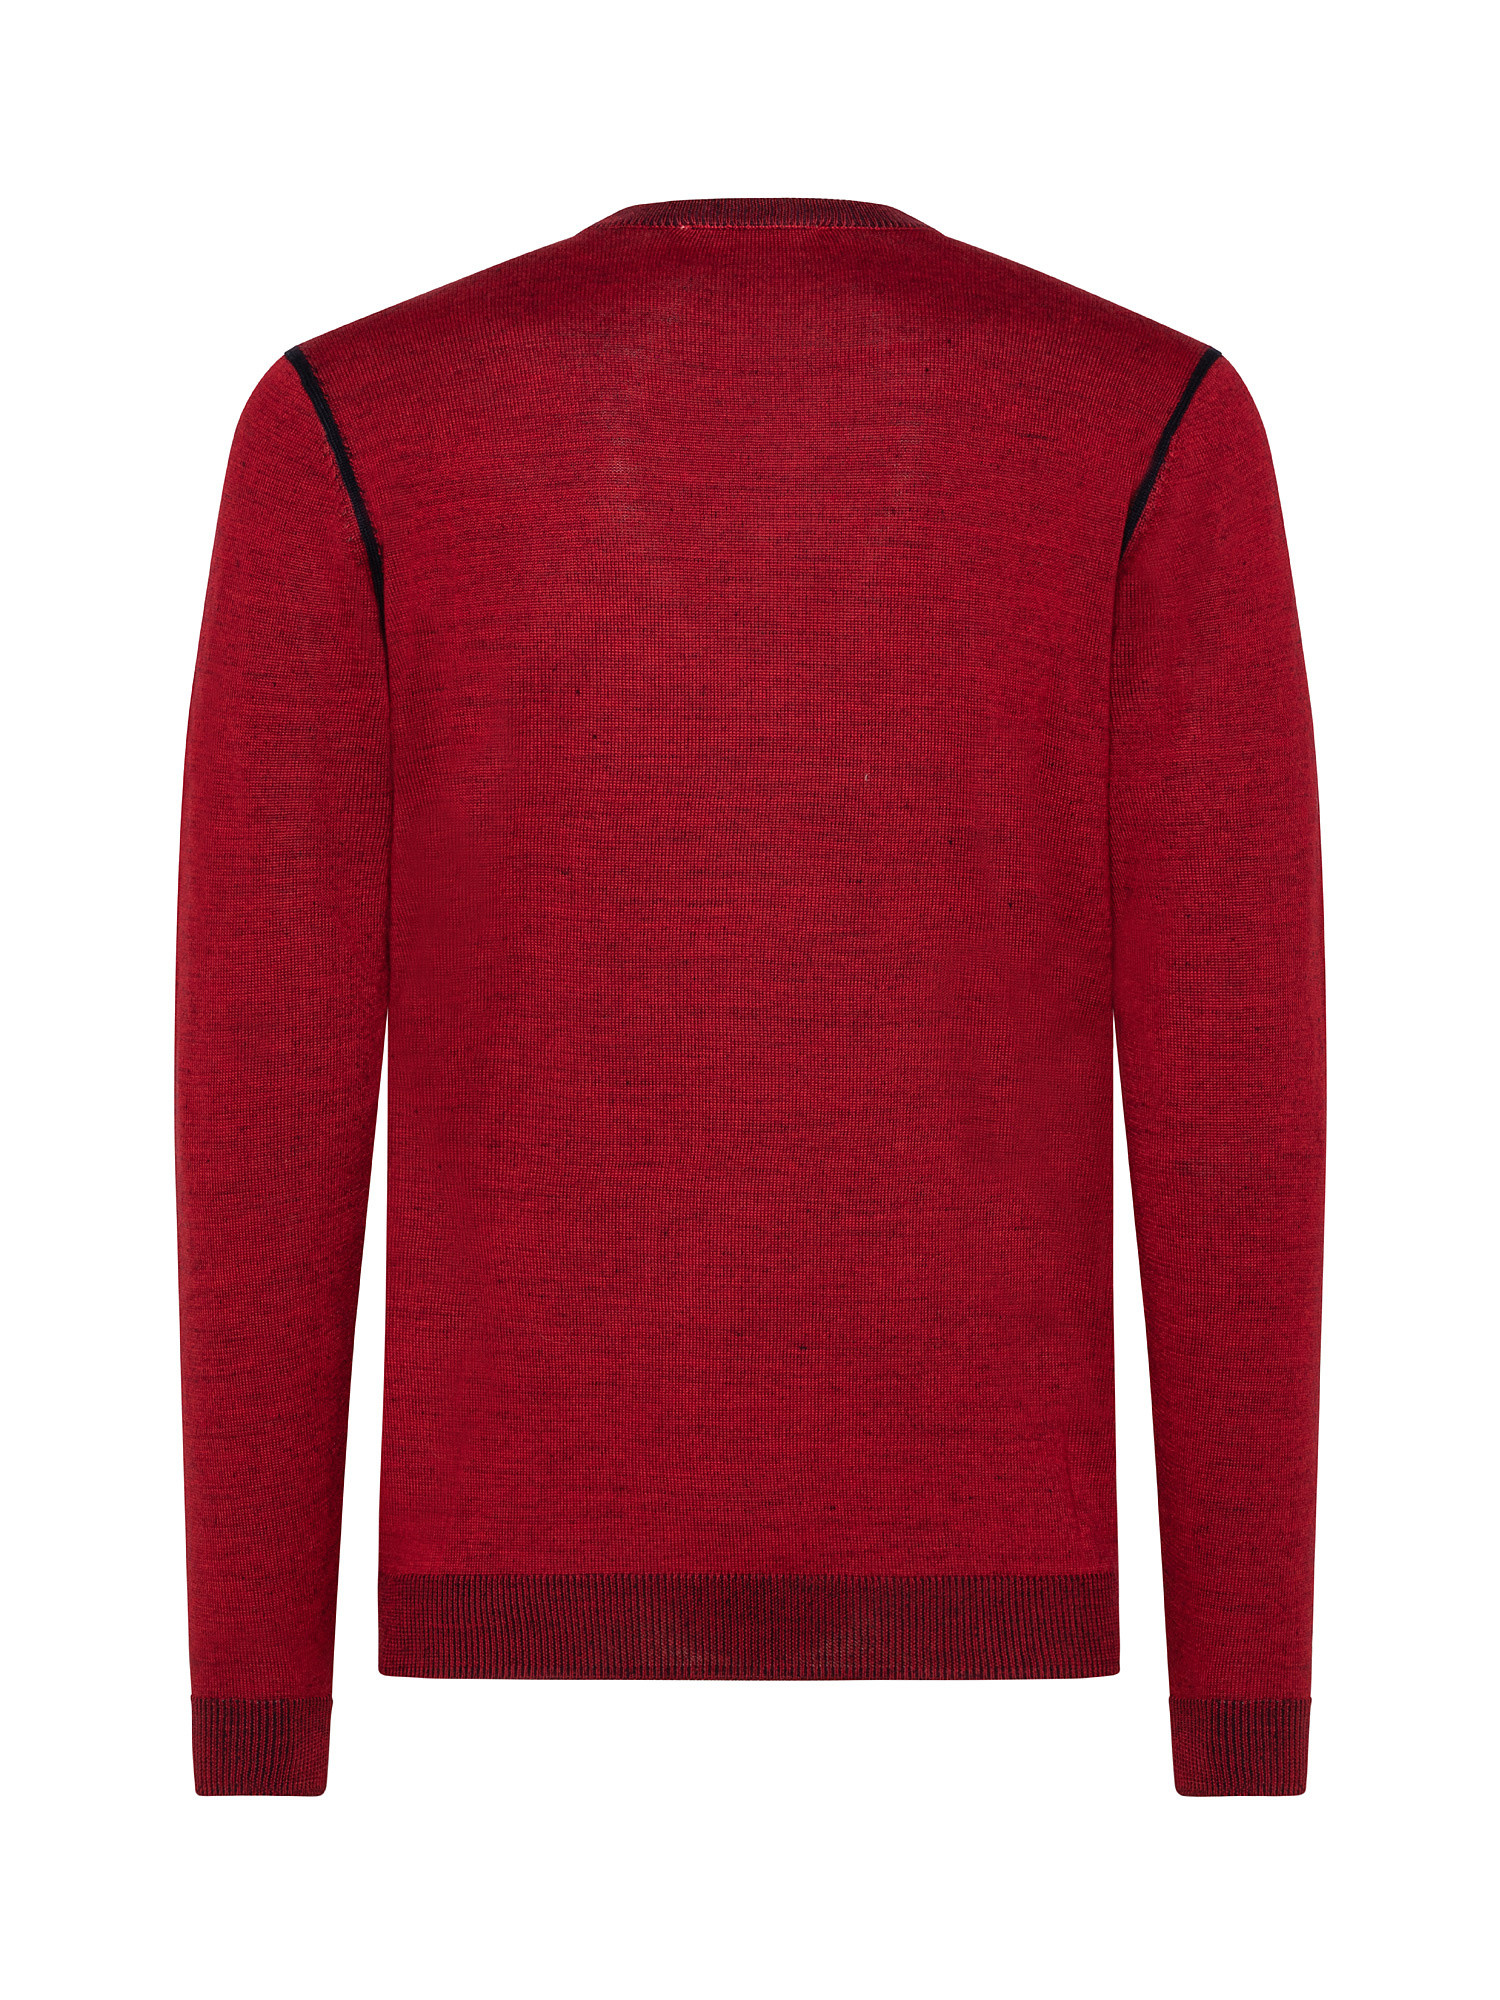 Wool blend crewneck sweater, Red, large image number 1